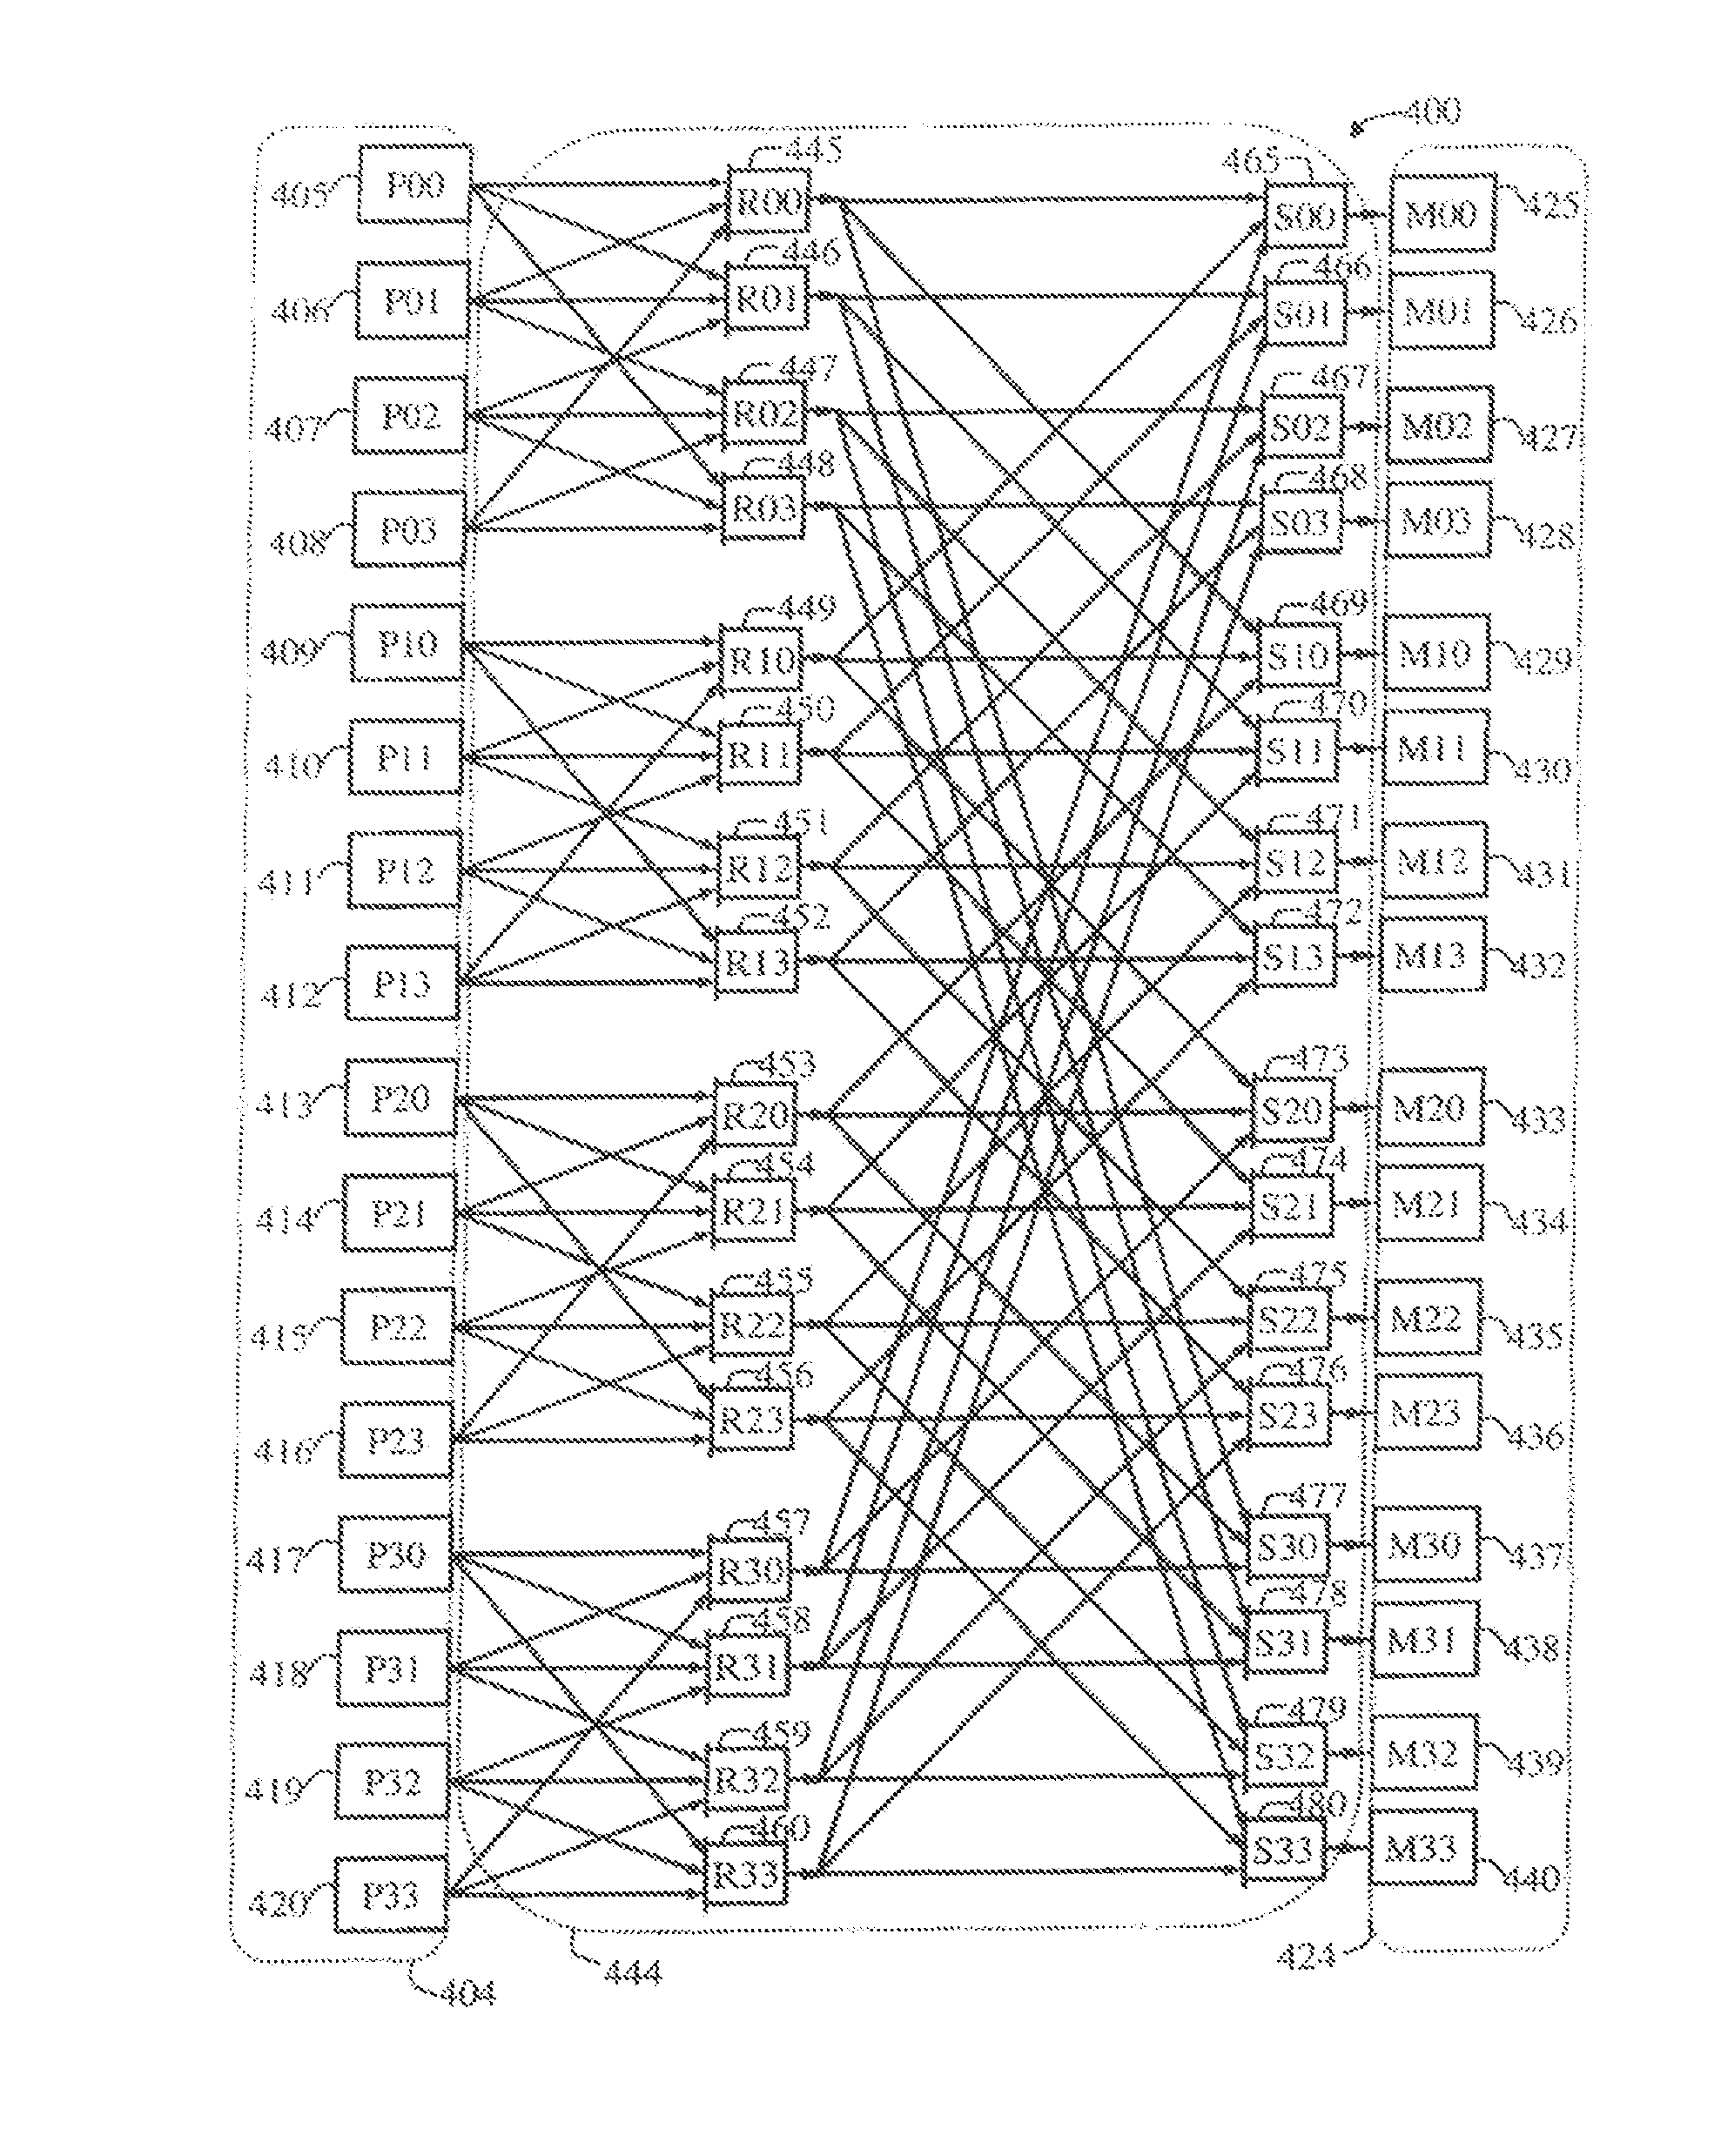 Interconnection network connecting operation-configurable nodes according to one or more levels of adjacency in multiple dimensions of communication in a multi-processor and a neural processor